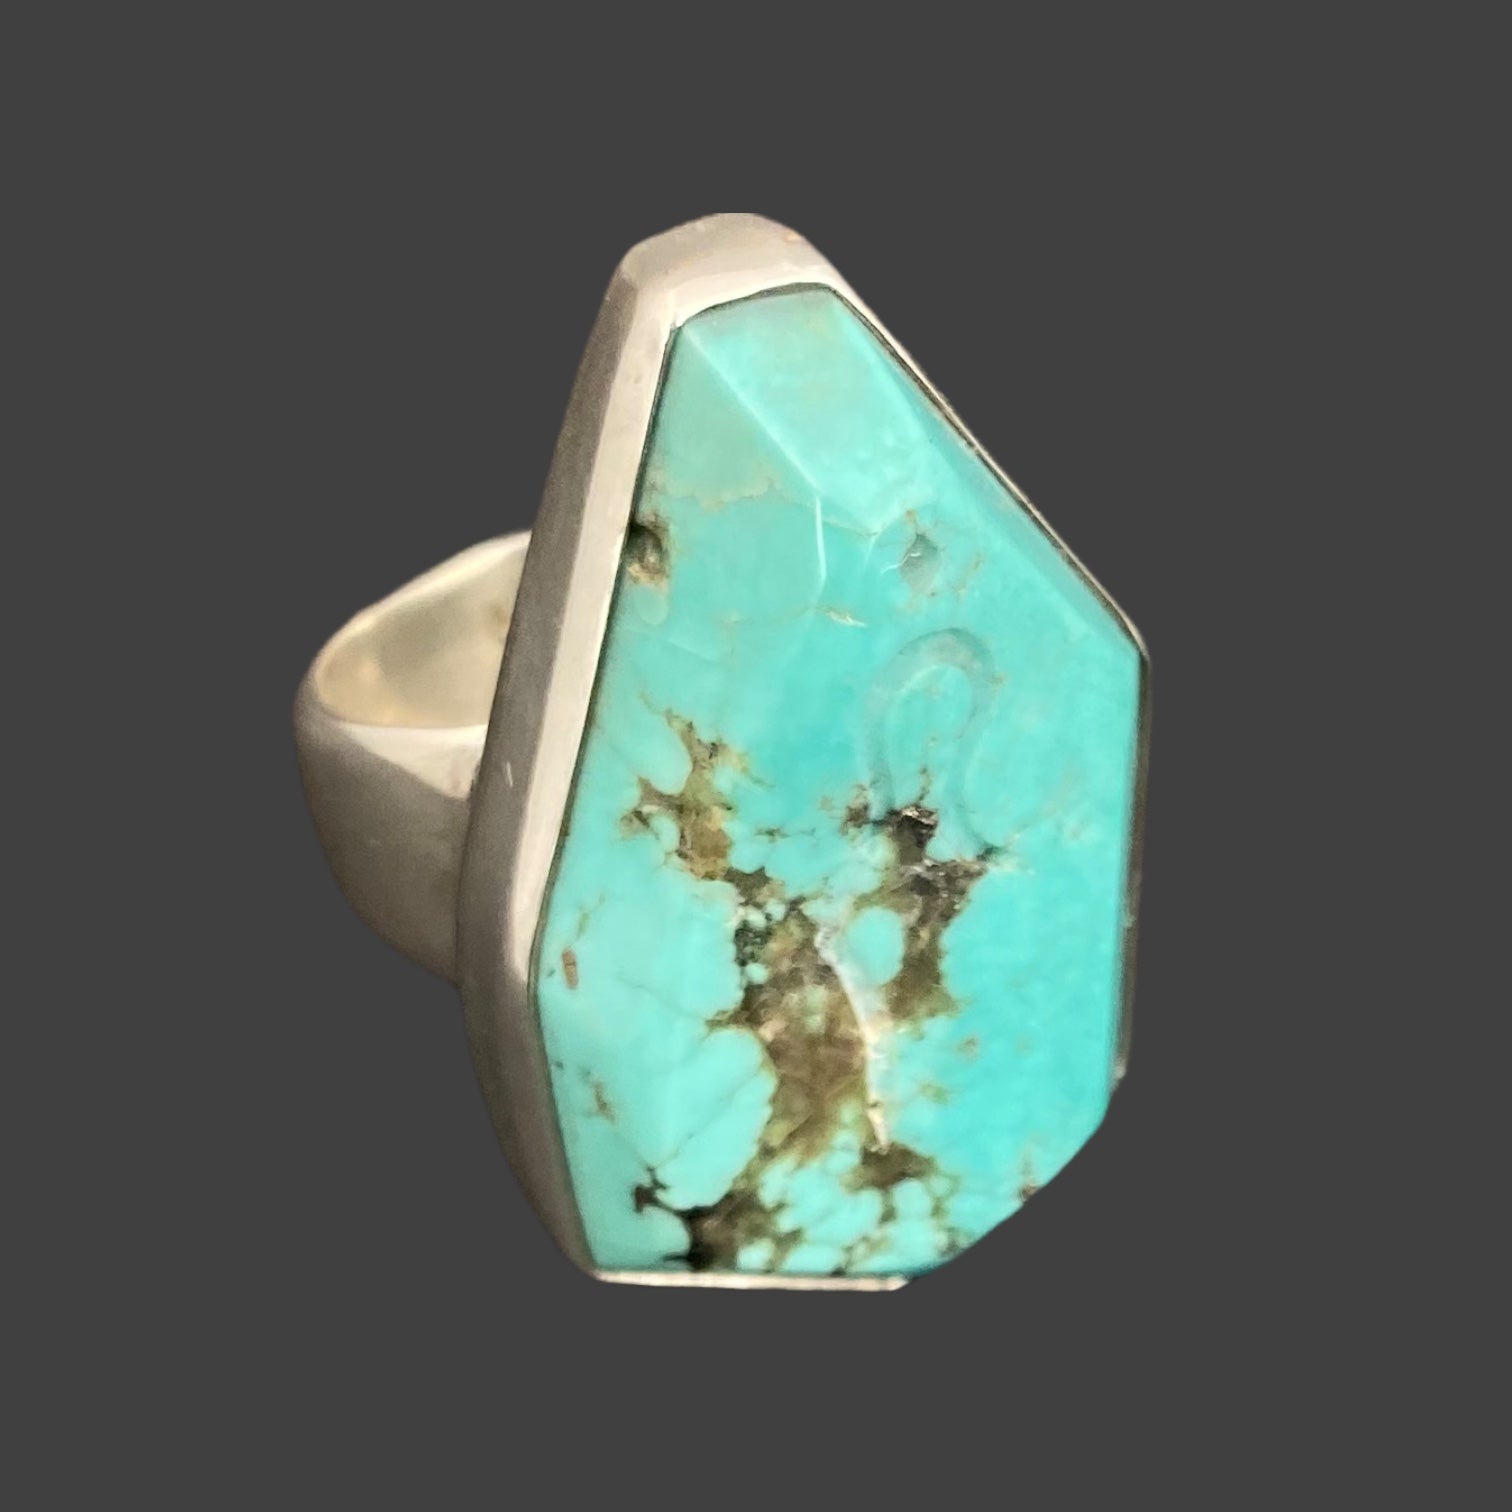 Arizona Turquoise Sterling Silver Ring with Divine Feminine Symbol size 9